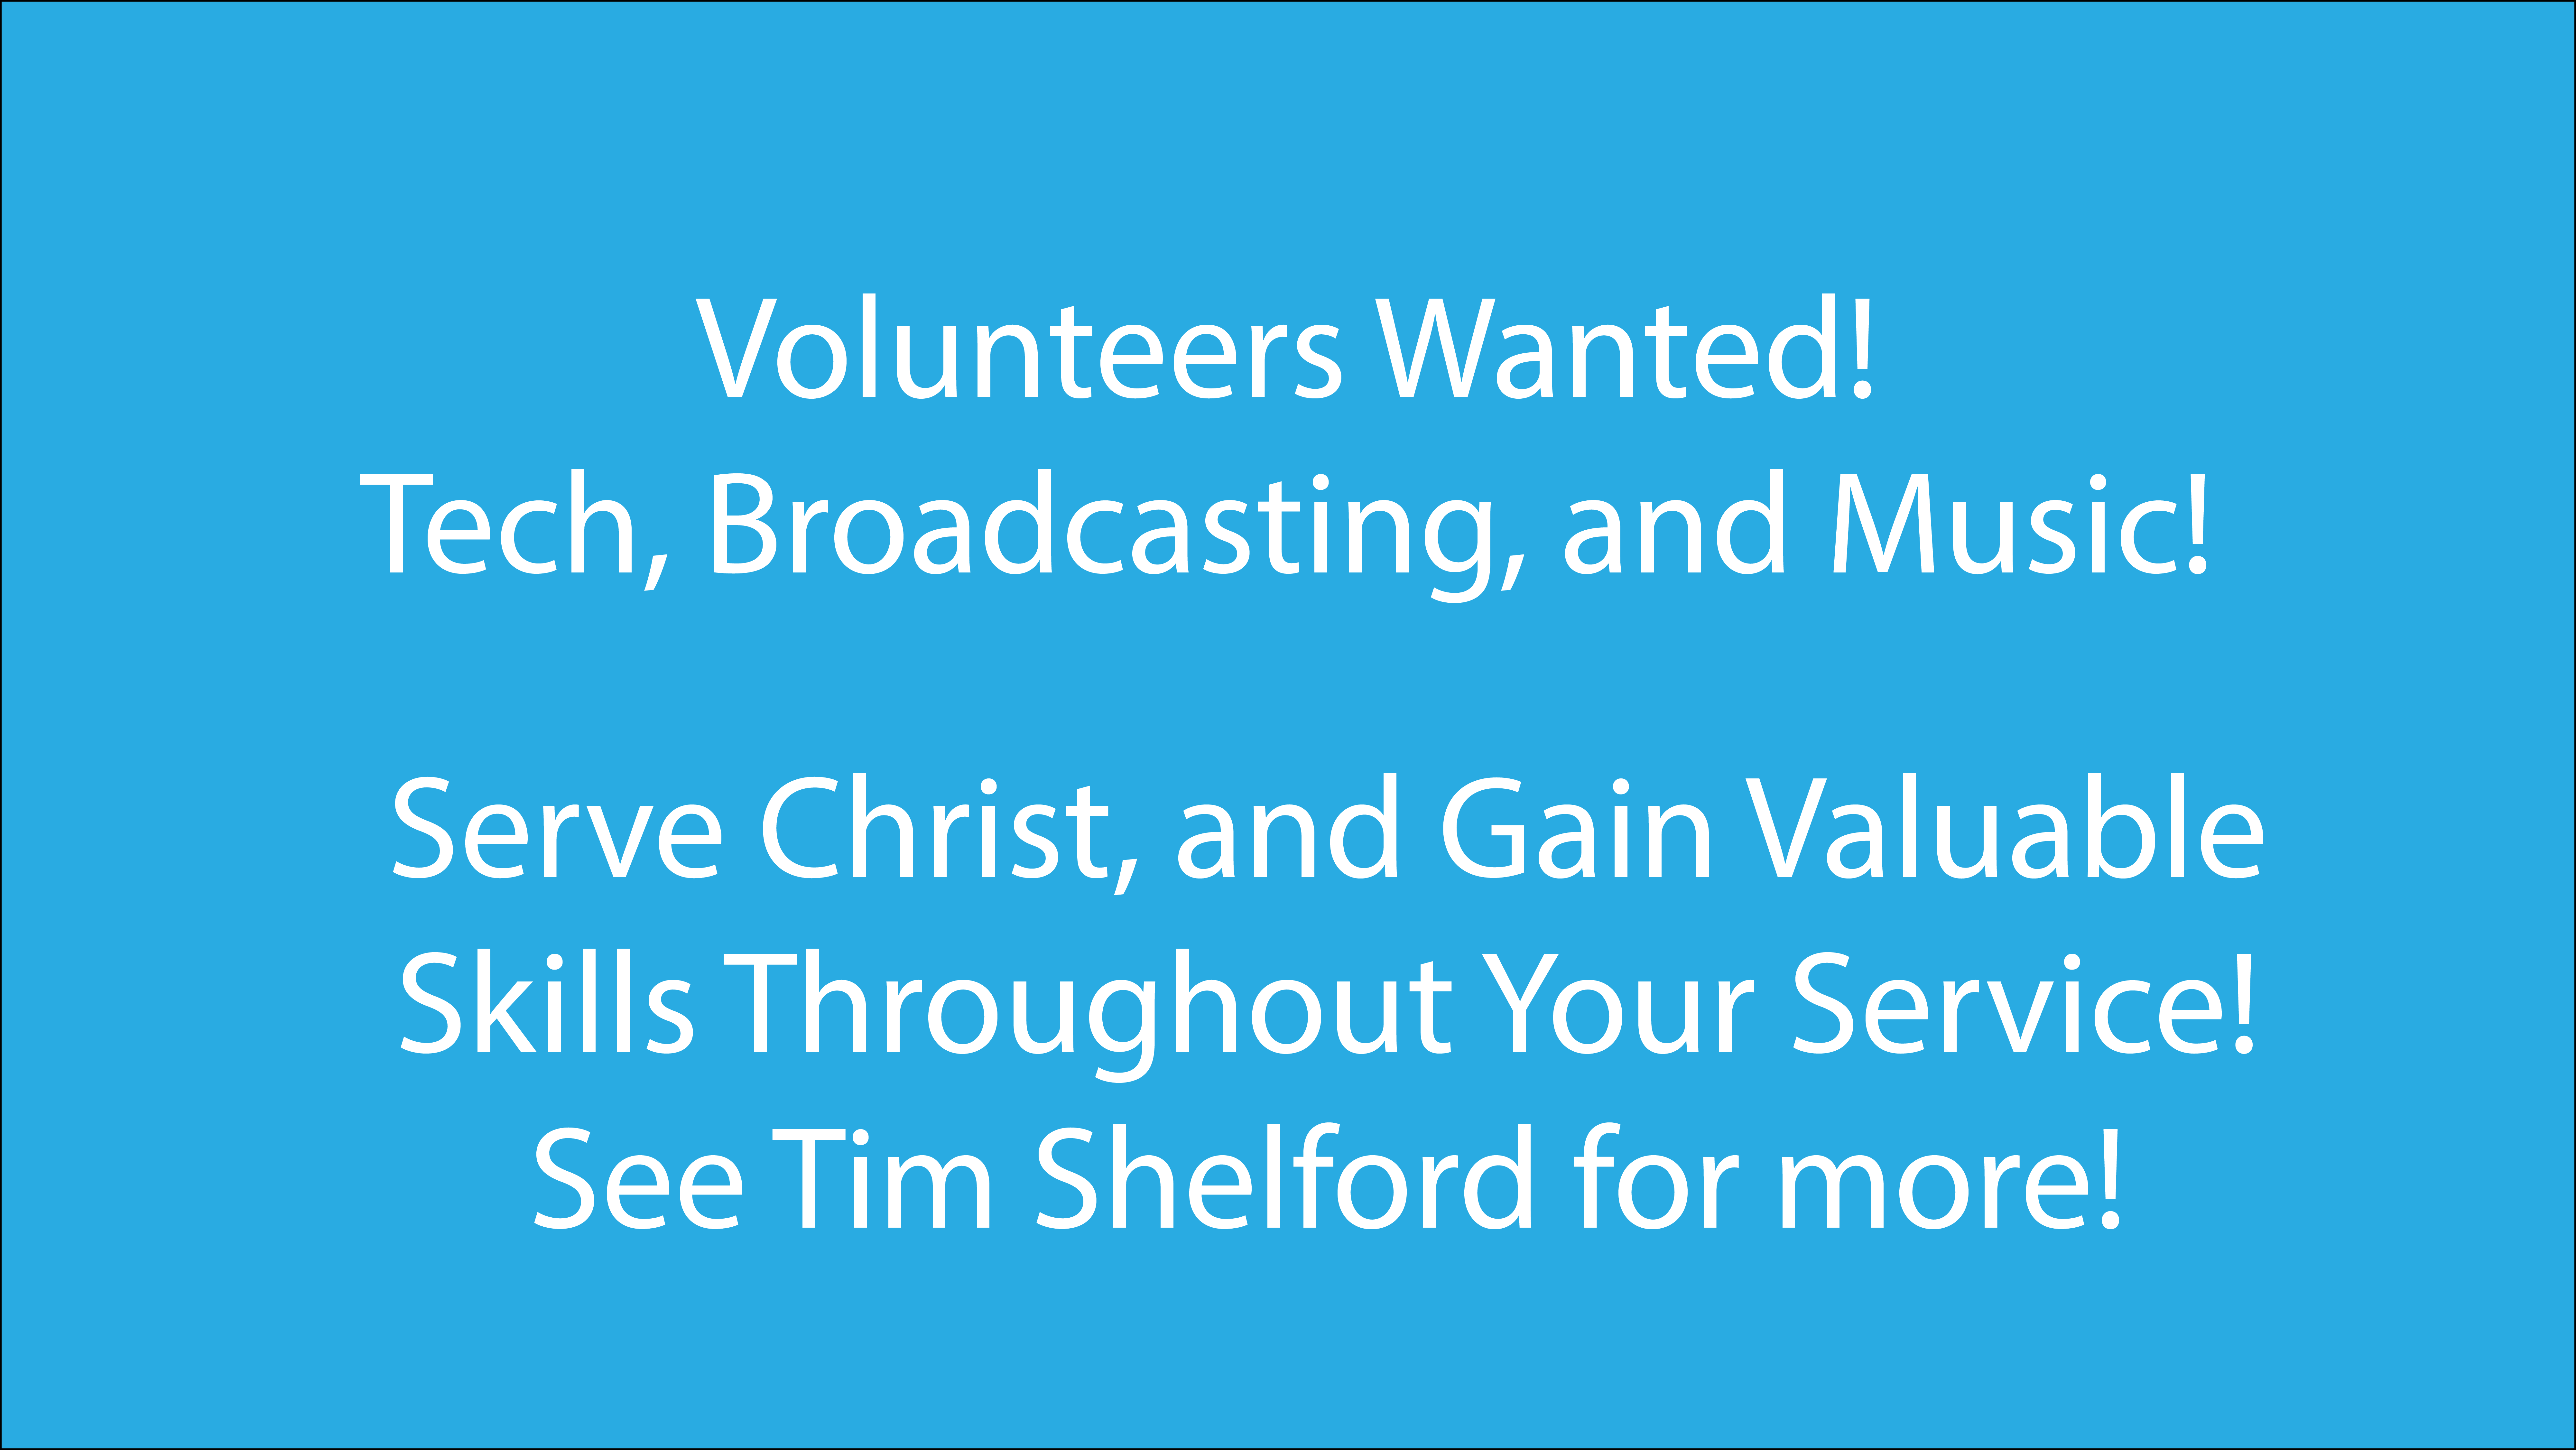 Volunteers wanted! Tech, Broadcasting, and Music